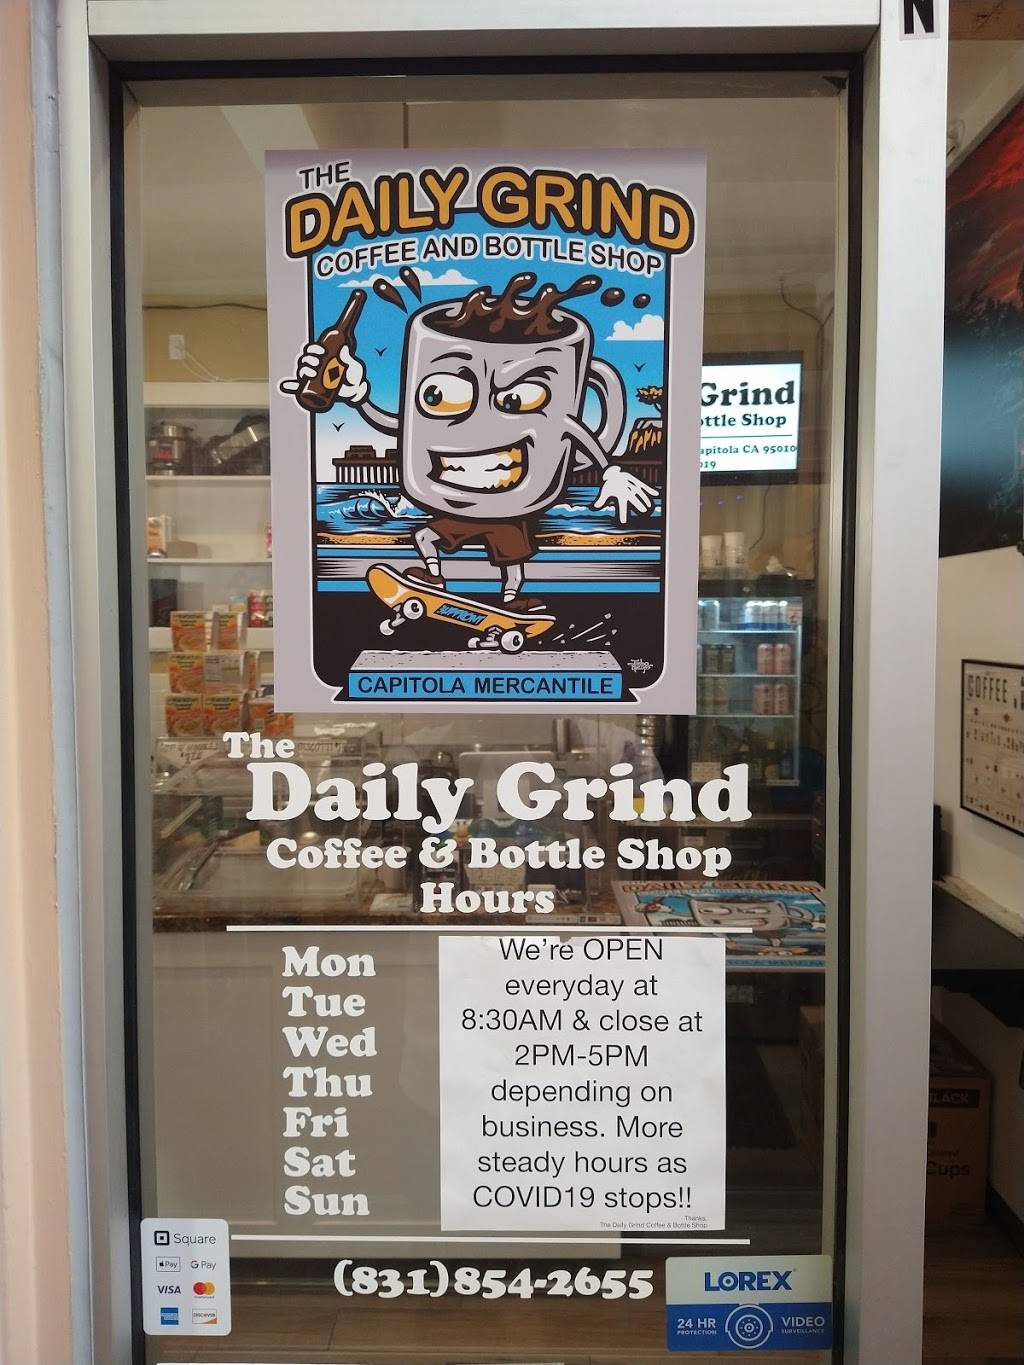 The Daily Grind Coffee & Bottle Shop | cafe | 115 San Jose Ave STE N, Capitola, CA 95010, USA | 8318542655 OR +1 831-854-2655